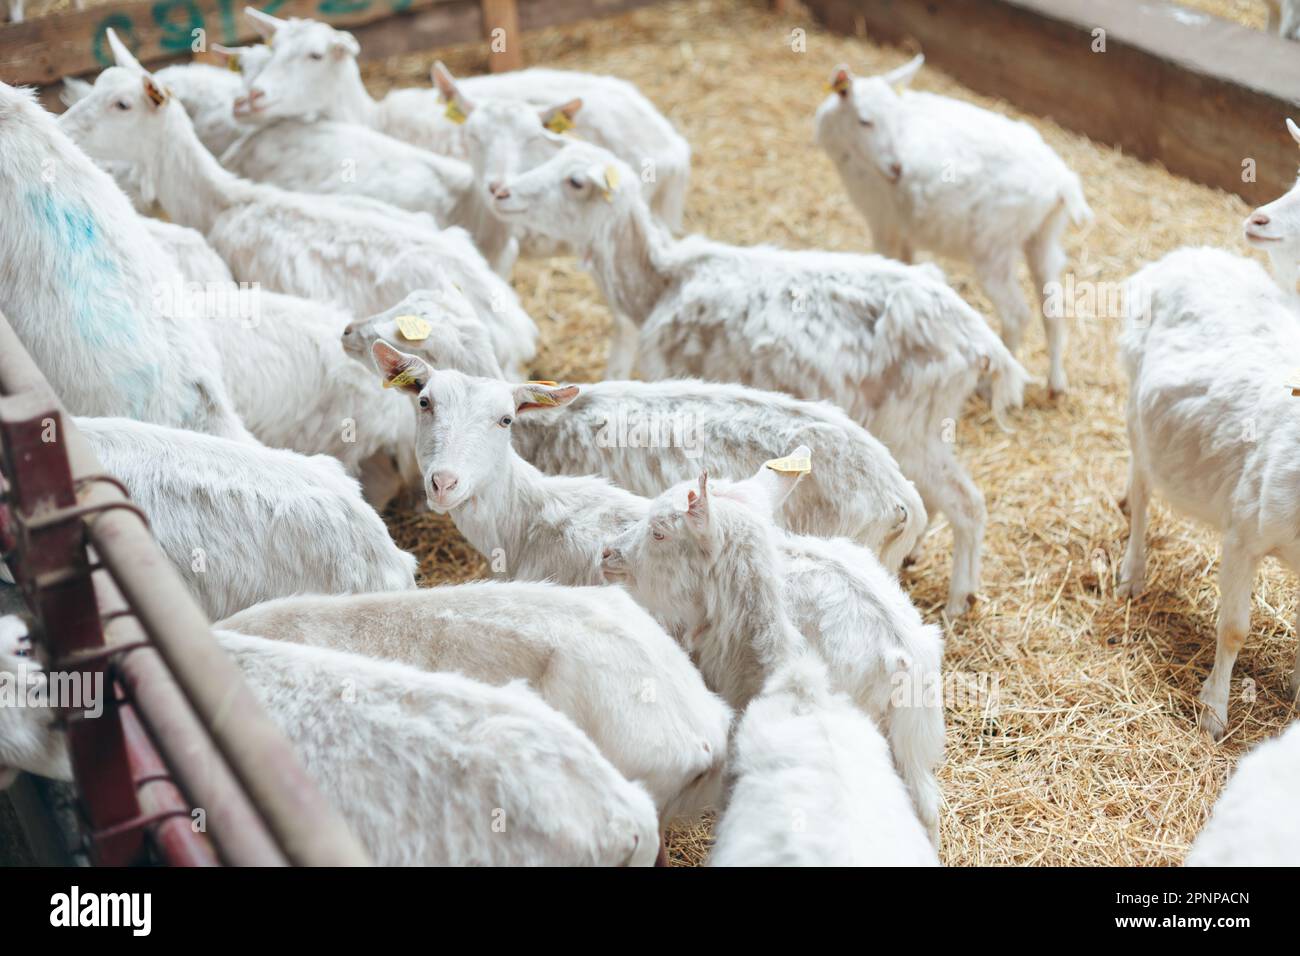 White Dairy Goat Breed Goats on Farm in the Barn. Livestock Agriculture Stock Photo